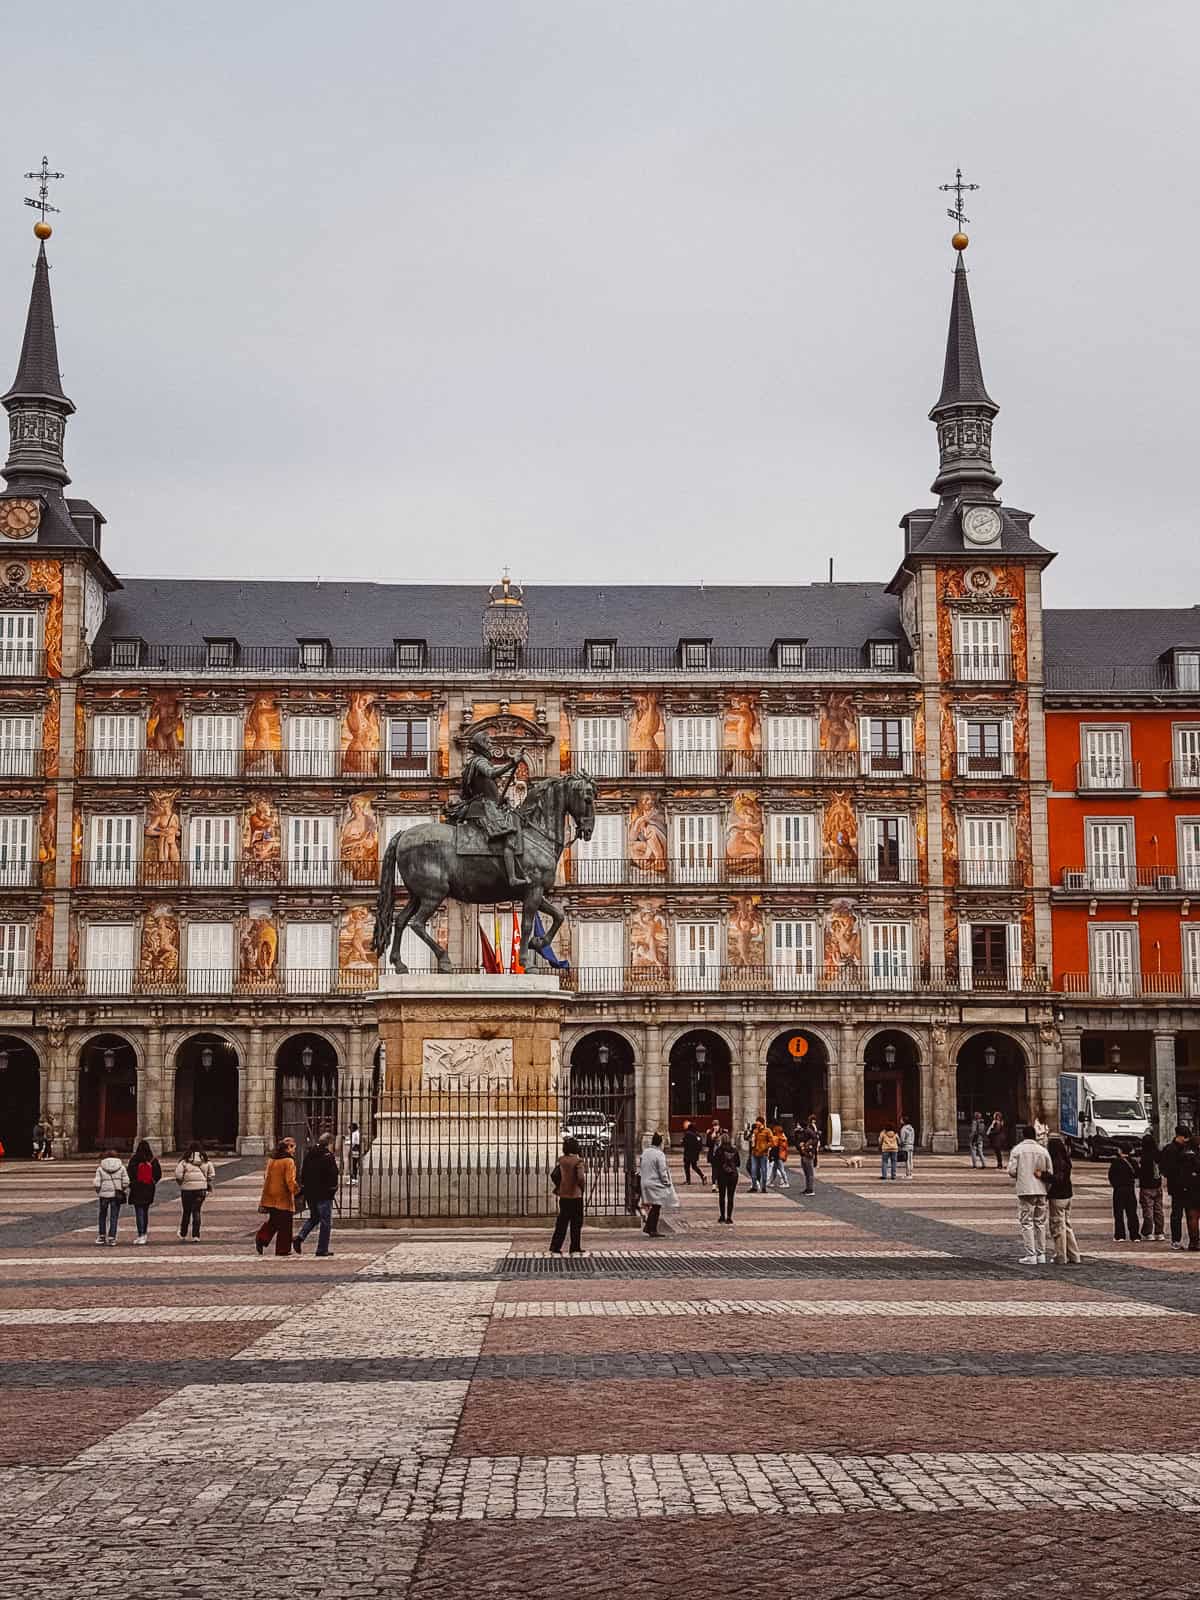 Visitors gather in the grand Plaza Mayor of Madrid, featuring the iconic equestrian statue of King Philip III set against the backdrop of the plaza's traditional Spanish architecture with ornate facades and spired towers under a cloudy sky